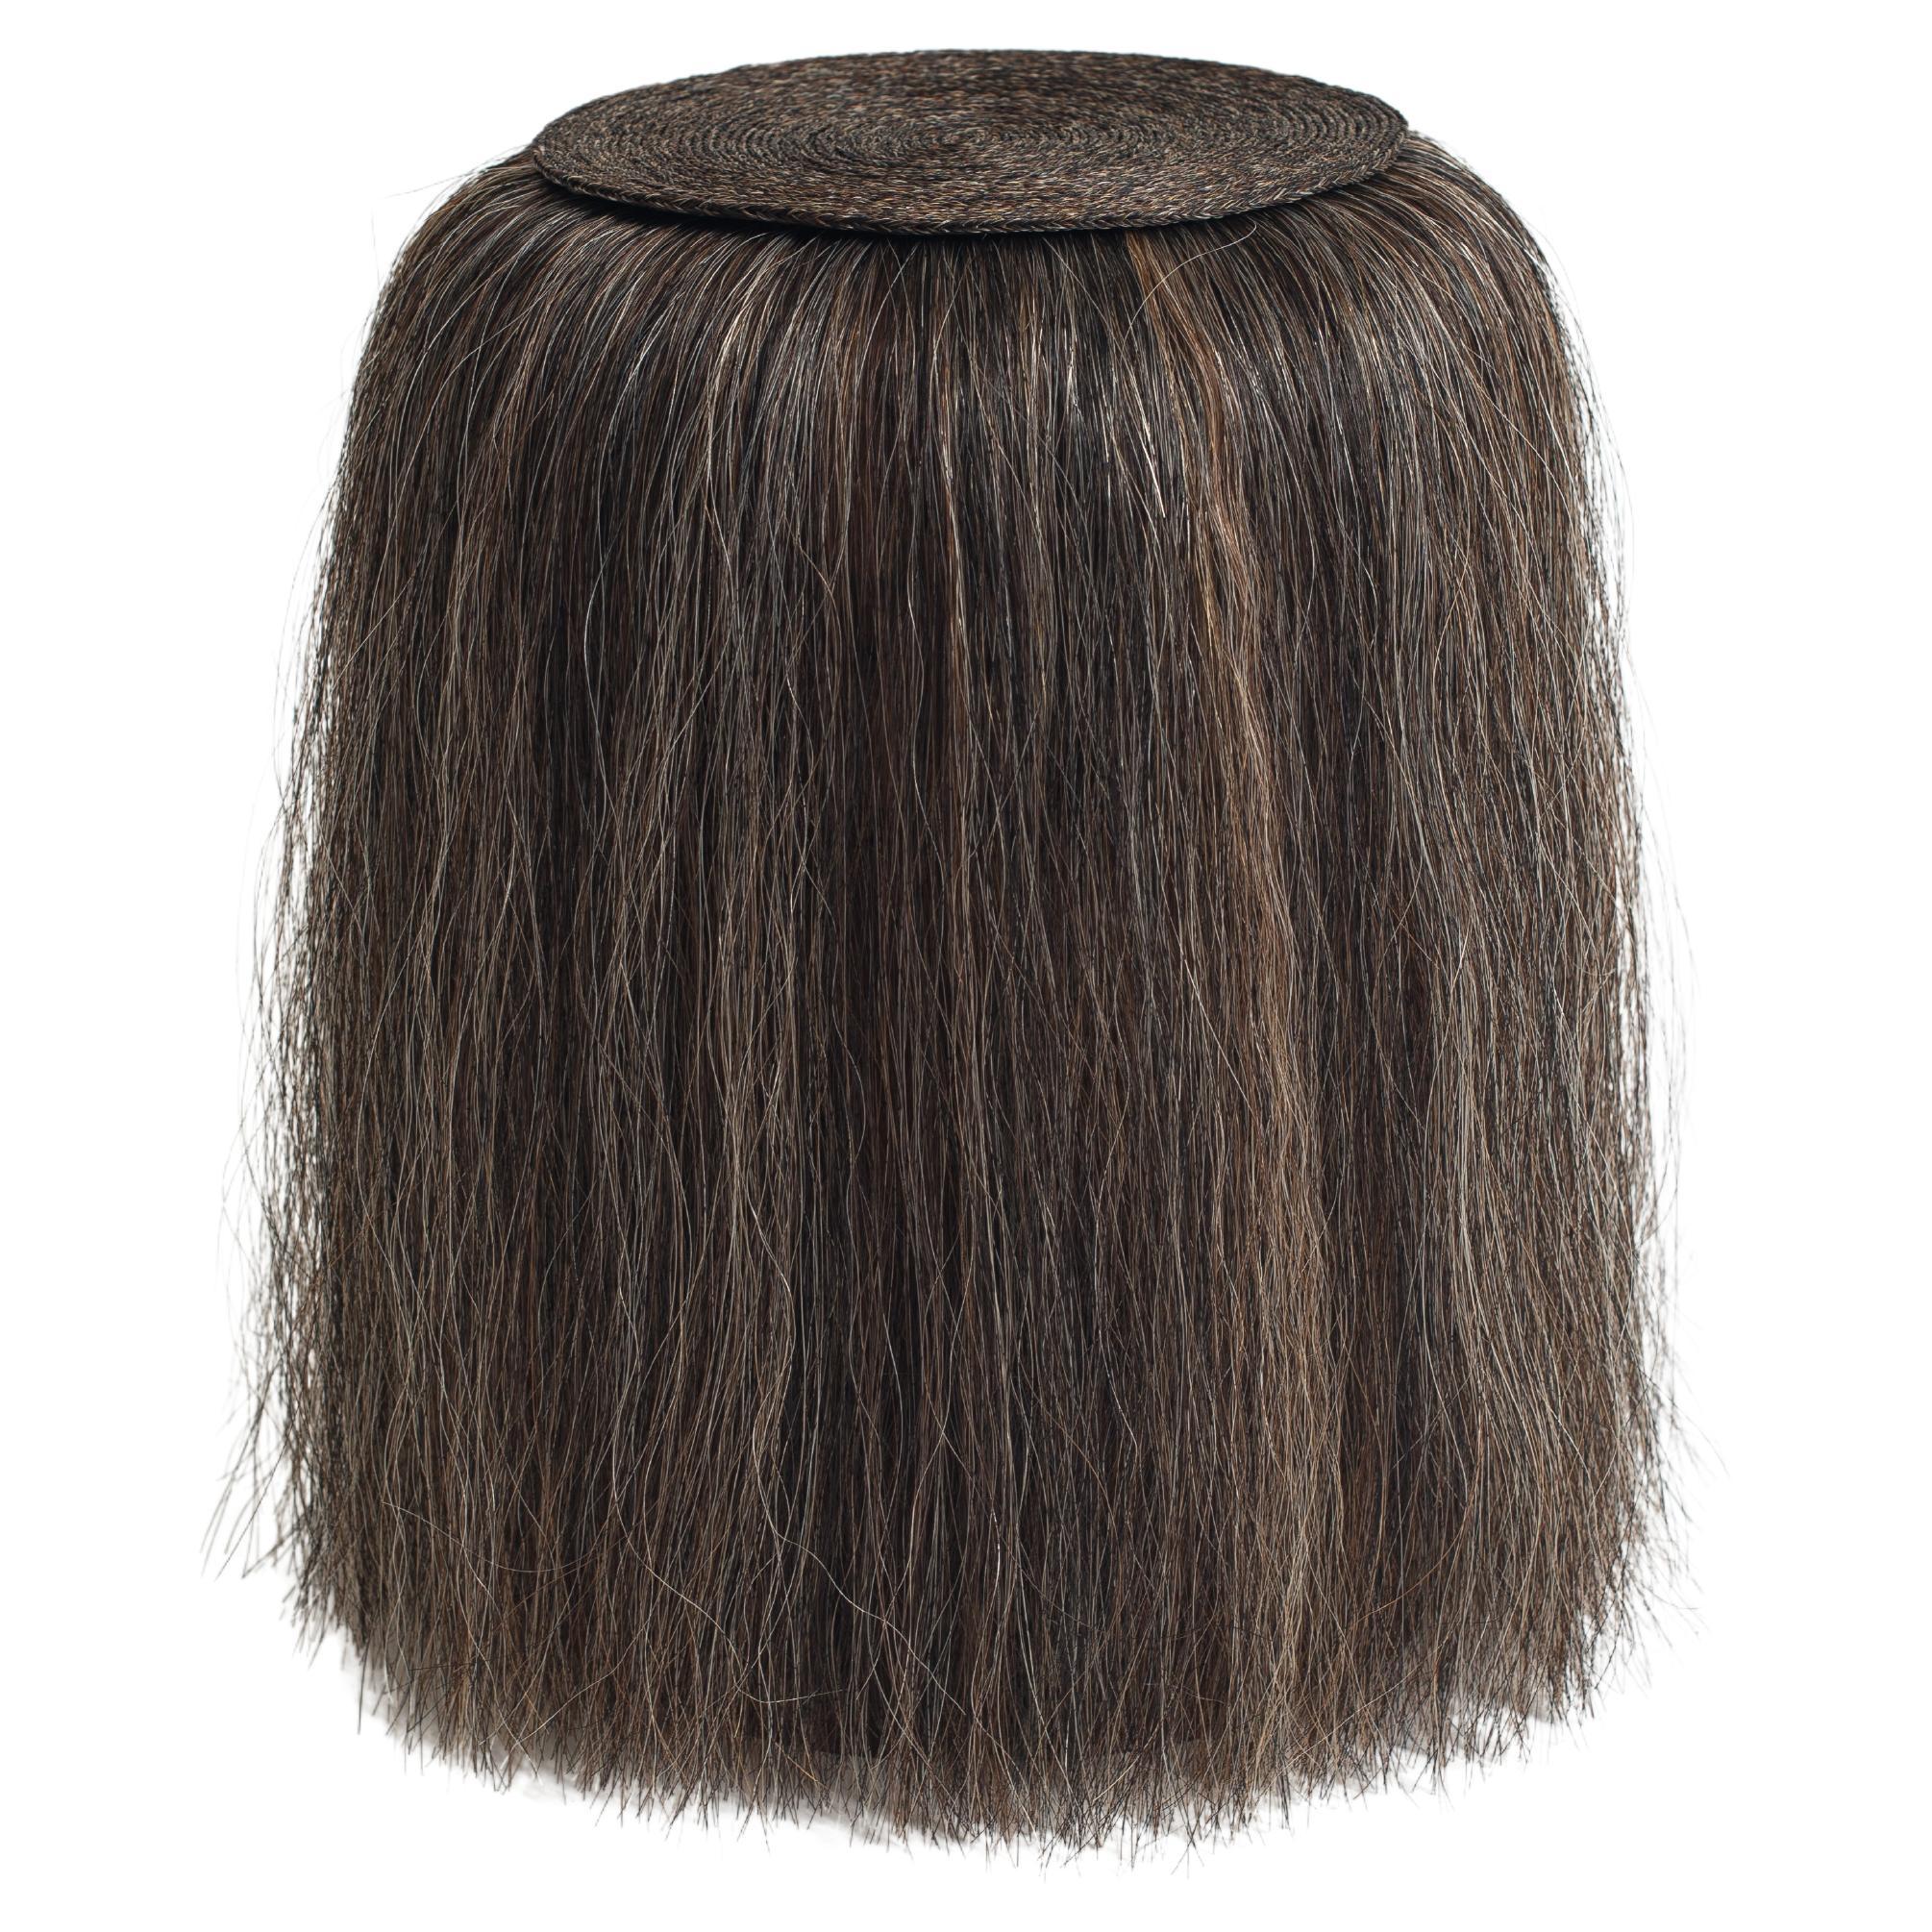 Cuaco Stool - Brown handwoven horsehair solid wood stool from Mexico.